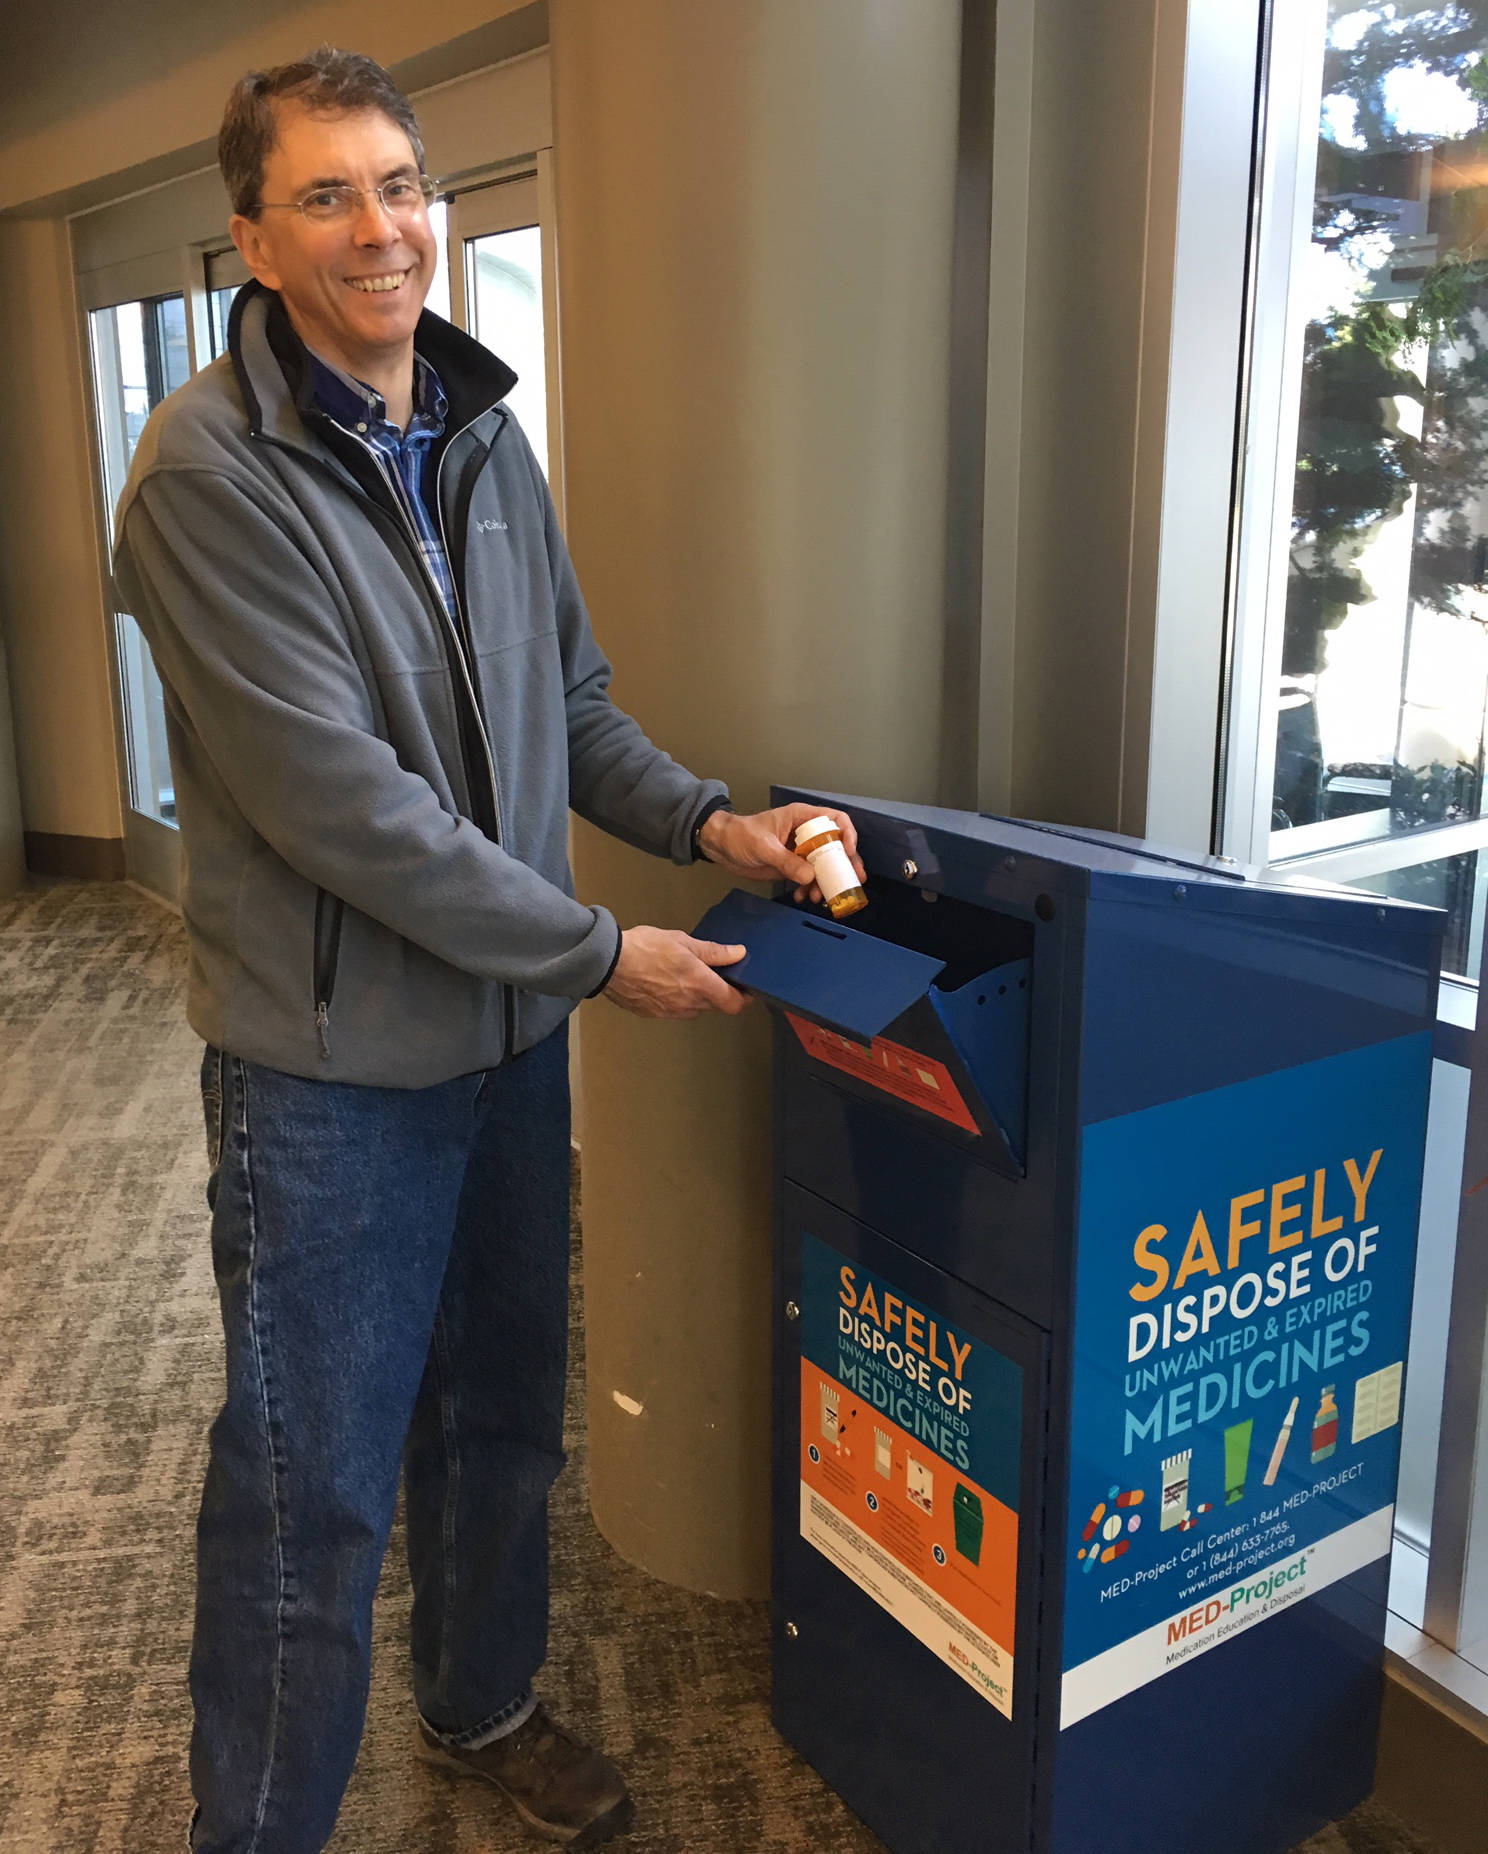 Skagit County Public Health’s Secure Medicine Return through MED Project lets you safely dispose of medications any time.